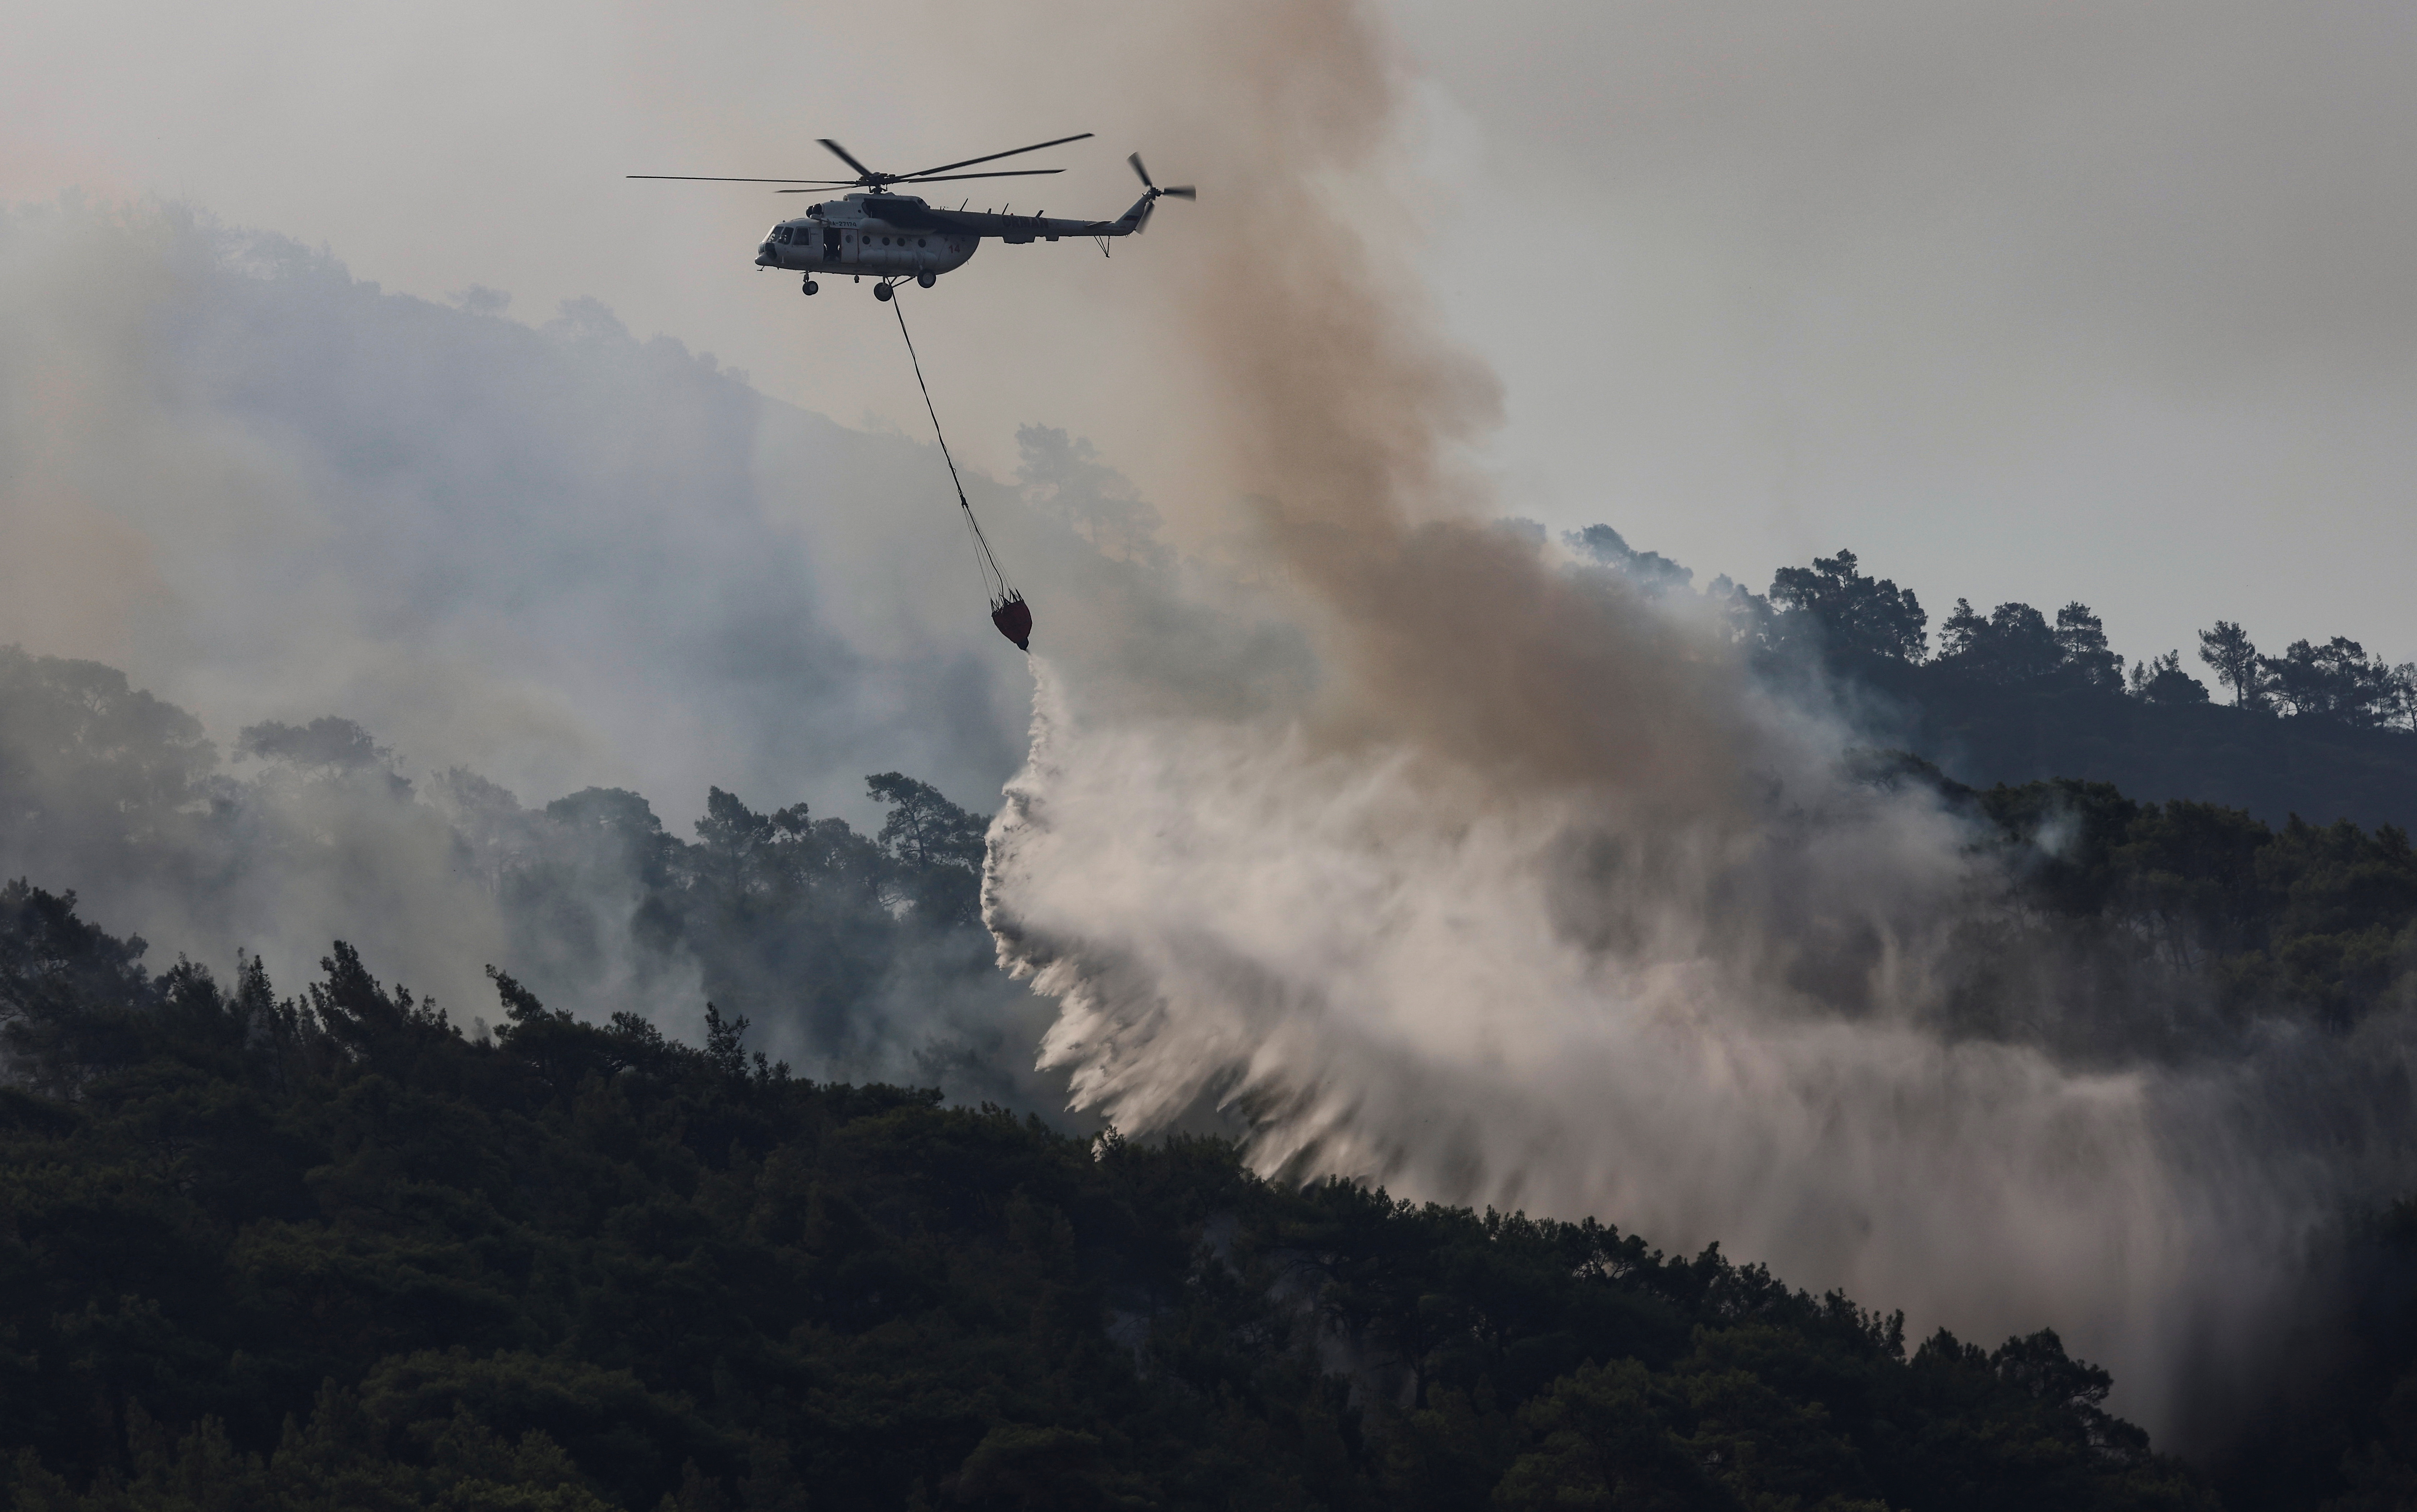 A firefighting helicopter drops water to a wildfire near Marmaris, Turkey, August 2, 2021. REUTERS/Umit Bektas